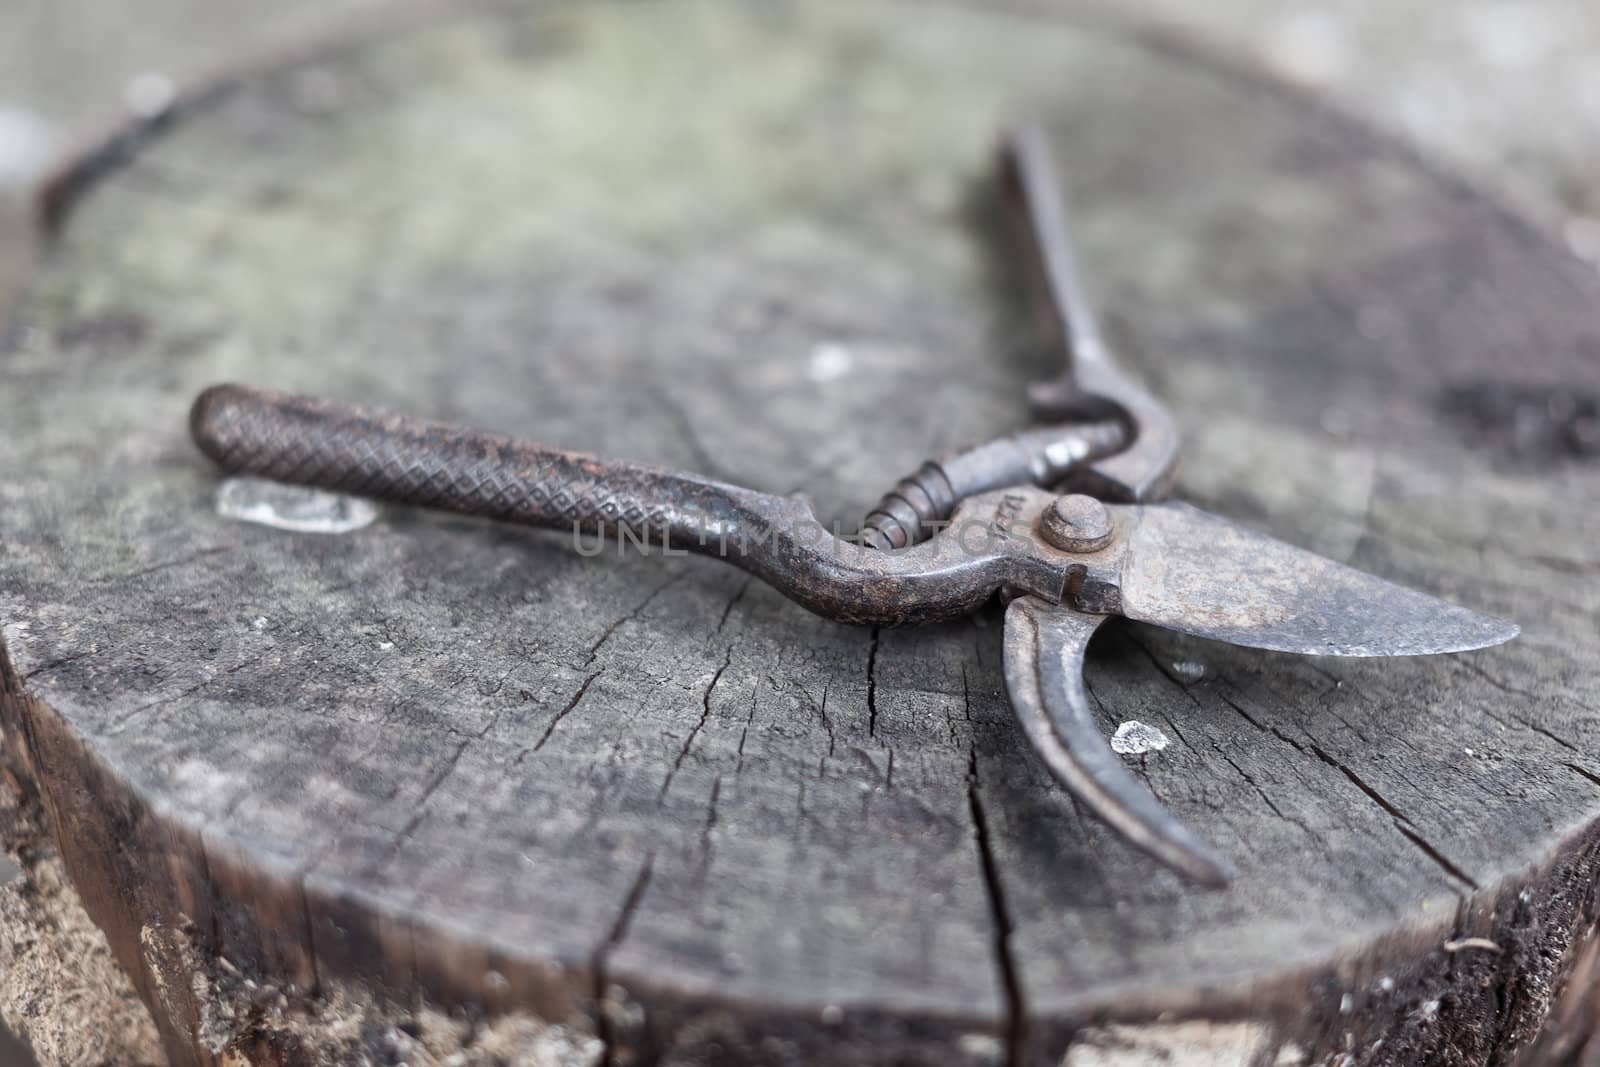 old, rusty shears on a log with swallow depth of field